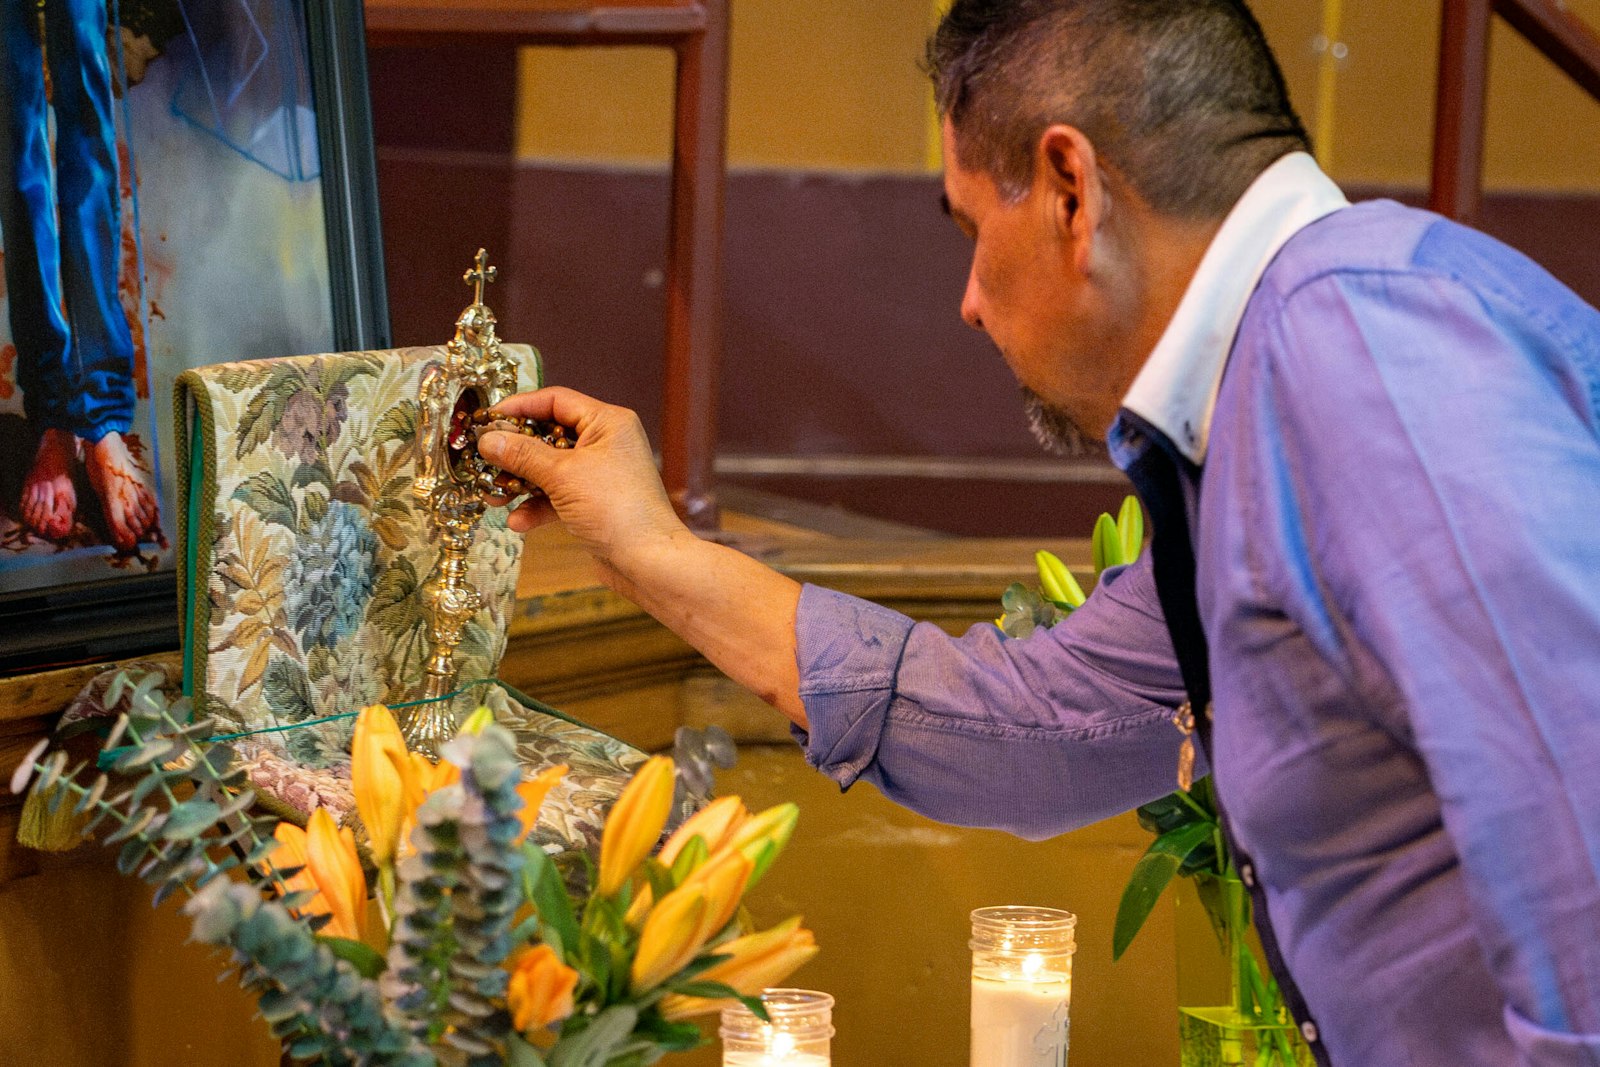 A man places a medal on the first-class relic of San José Sánchez del Río. (Photos by Steven Stechschulte | Detroit Catholic)